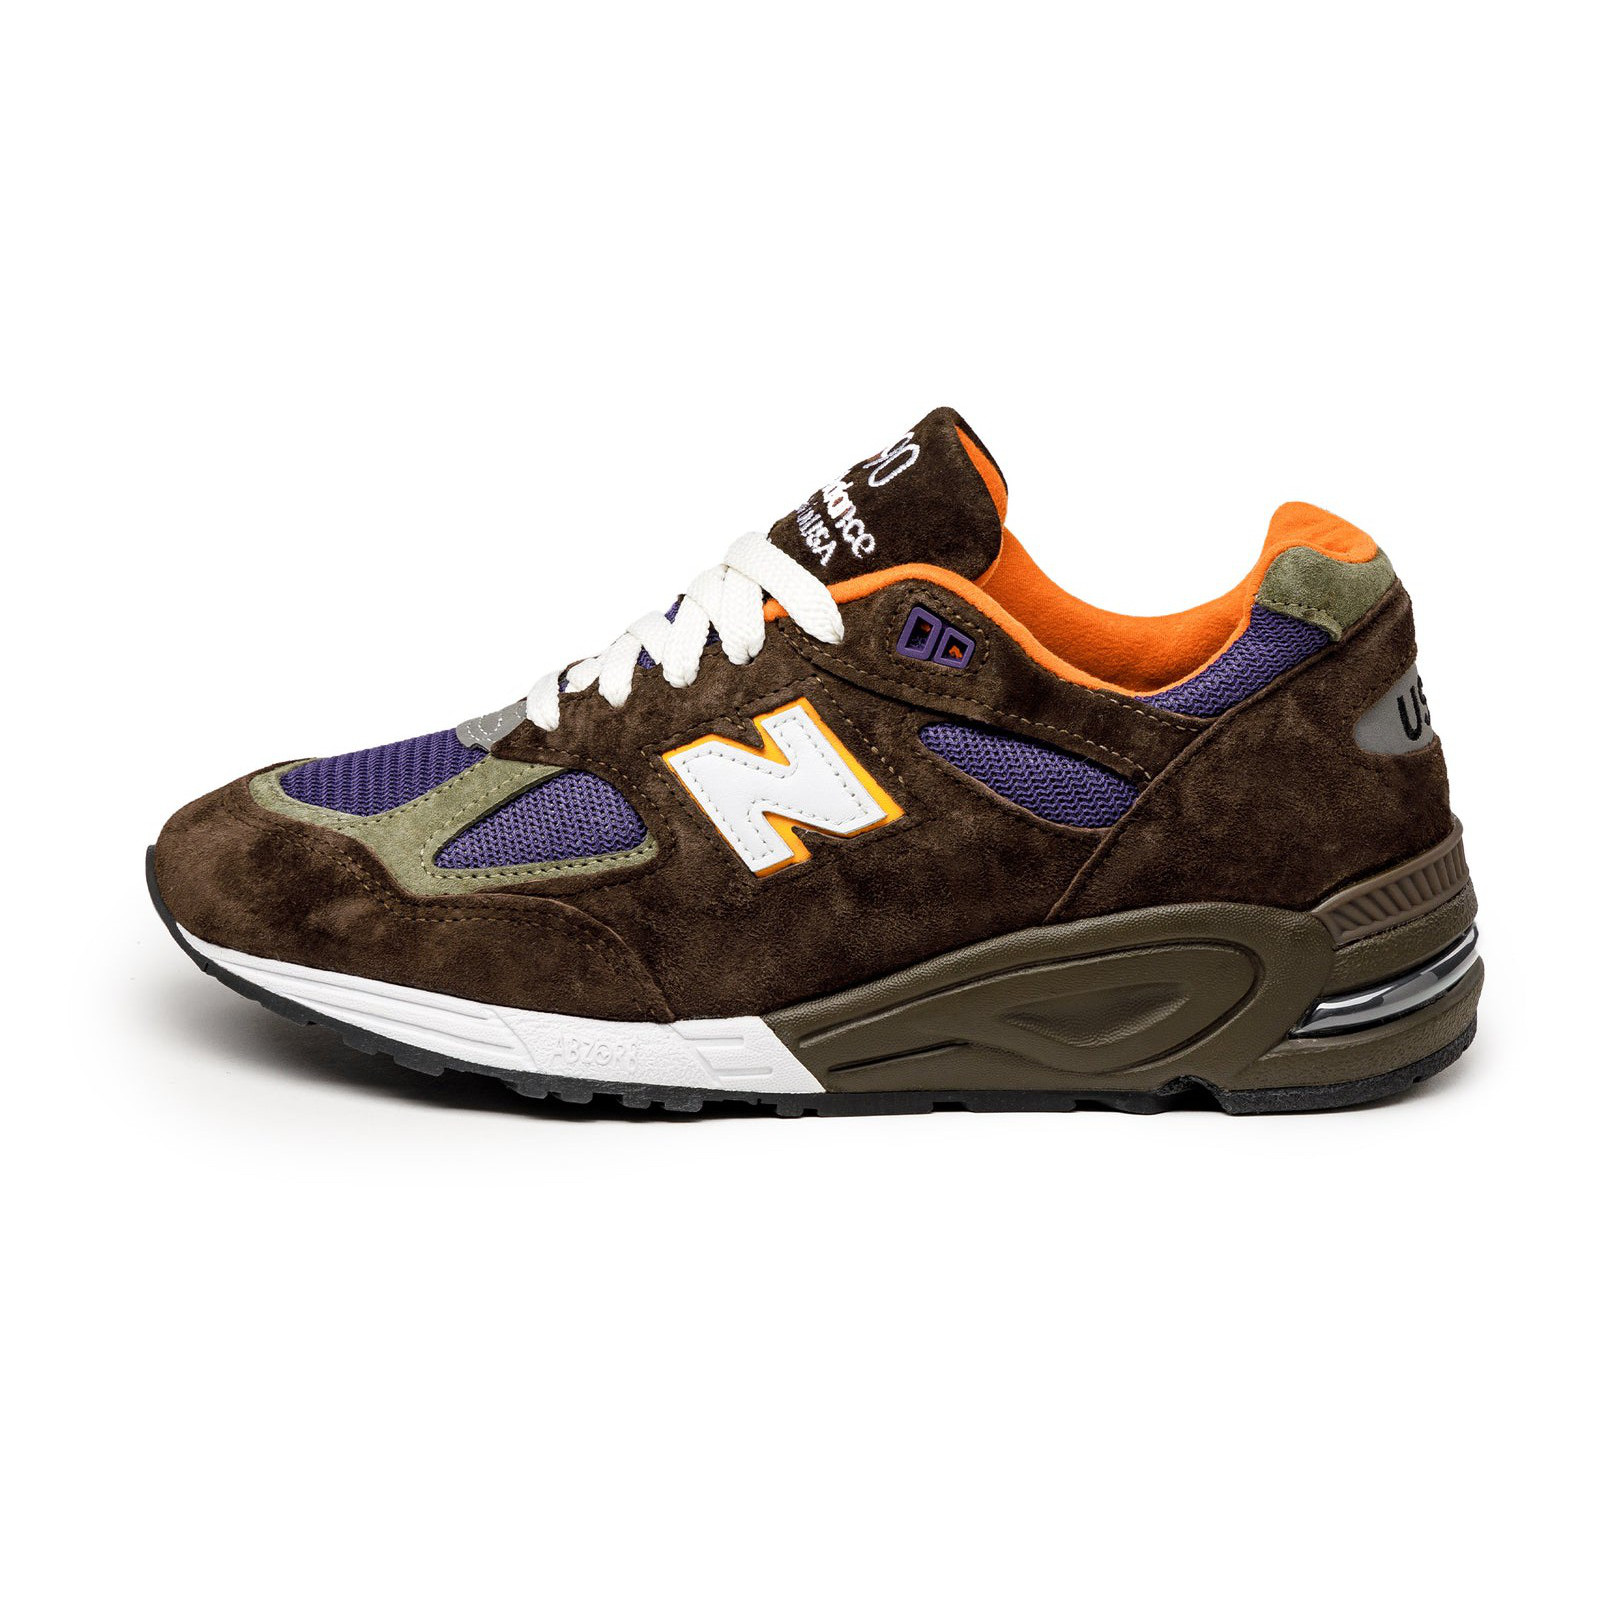 New Balance M990BR2
Made in USA
 Brown / Grey